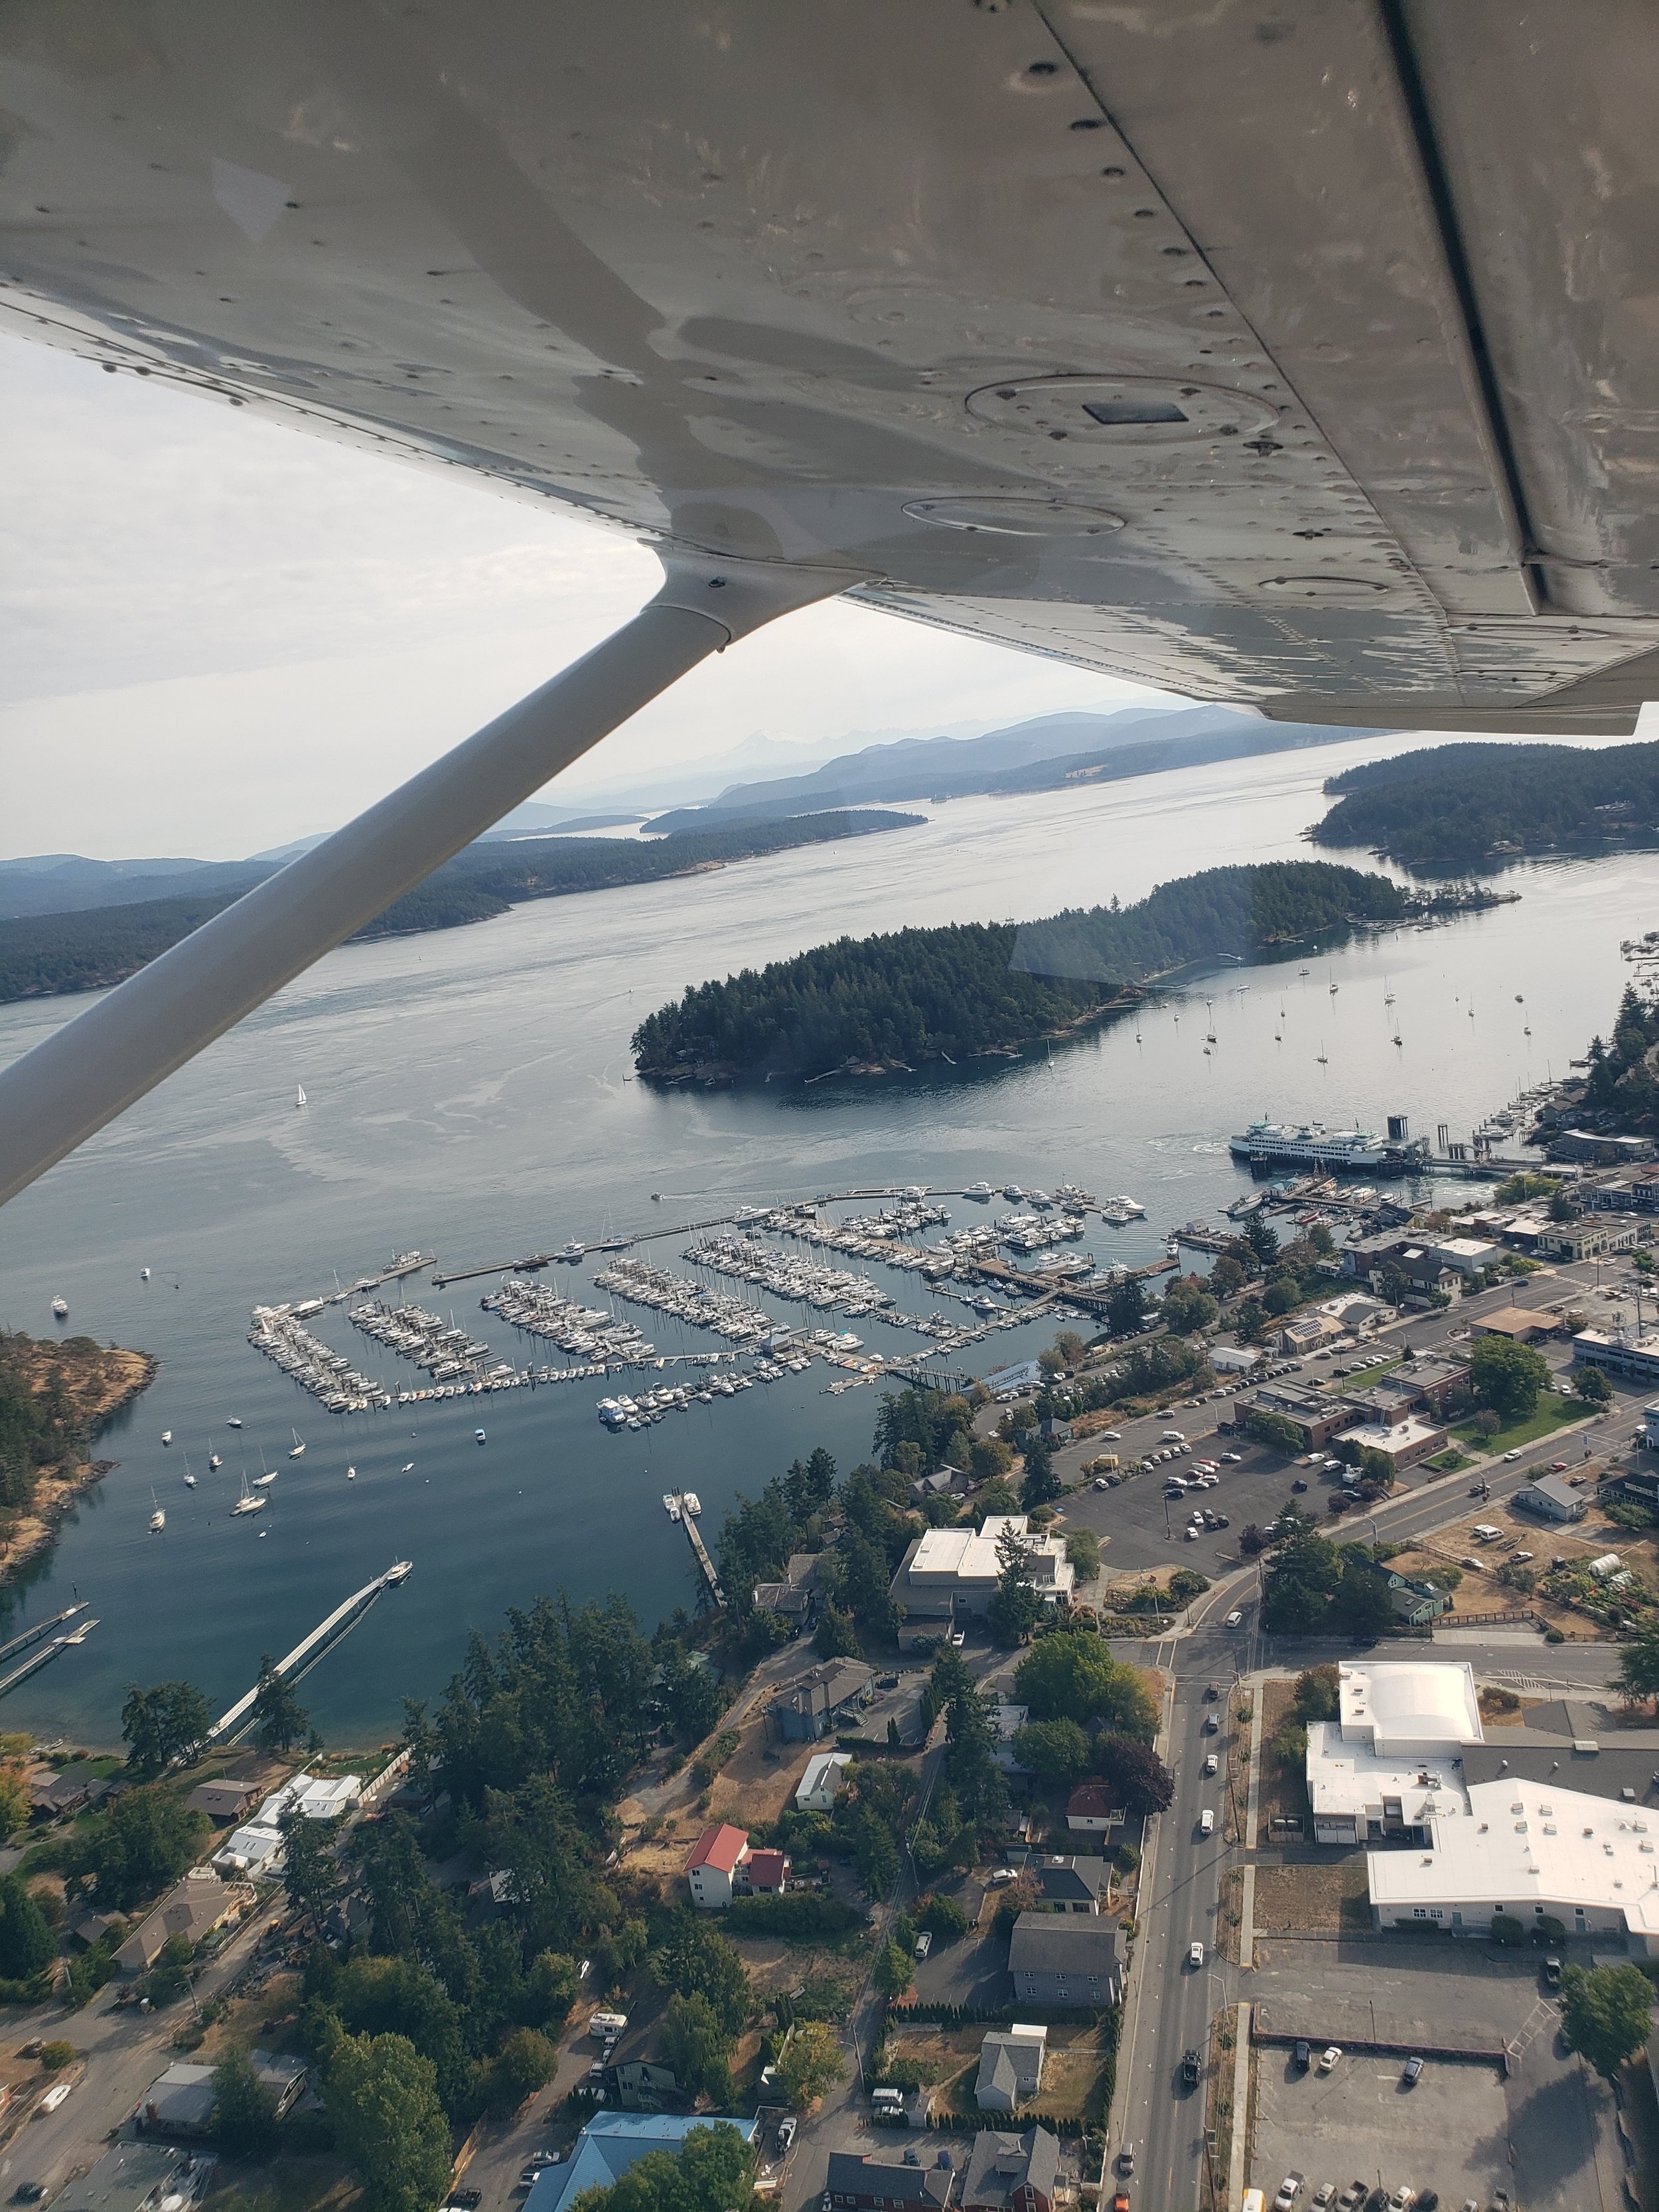 Coming in to Friday Harbor, WA for US customs